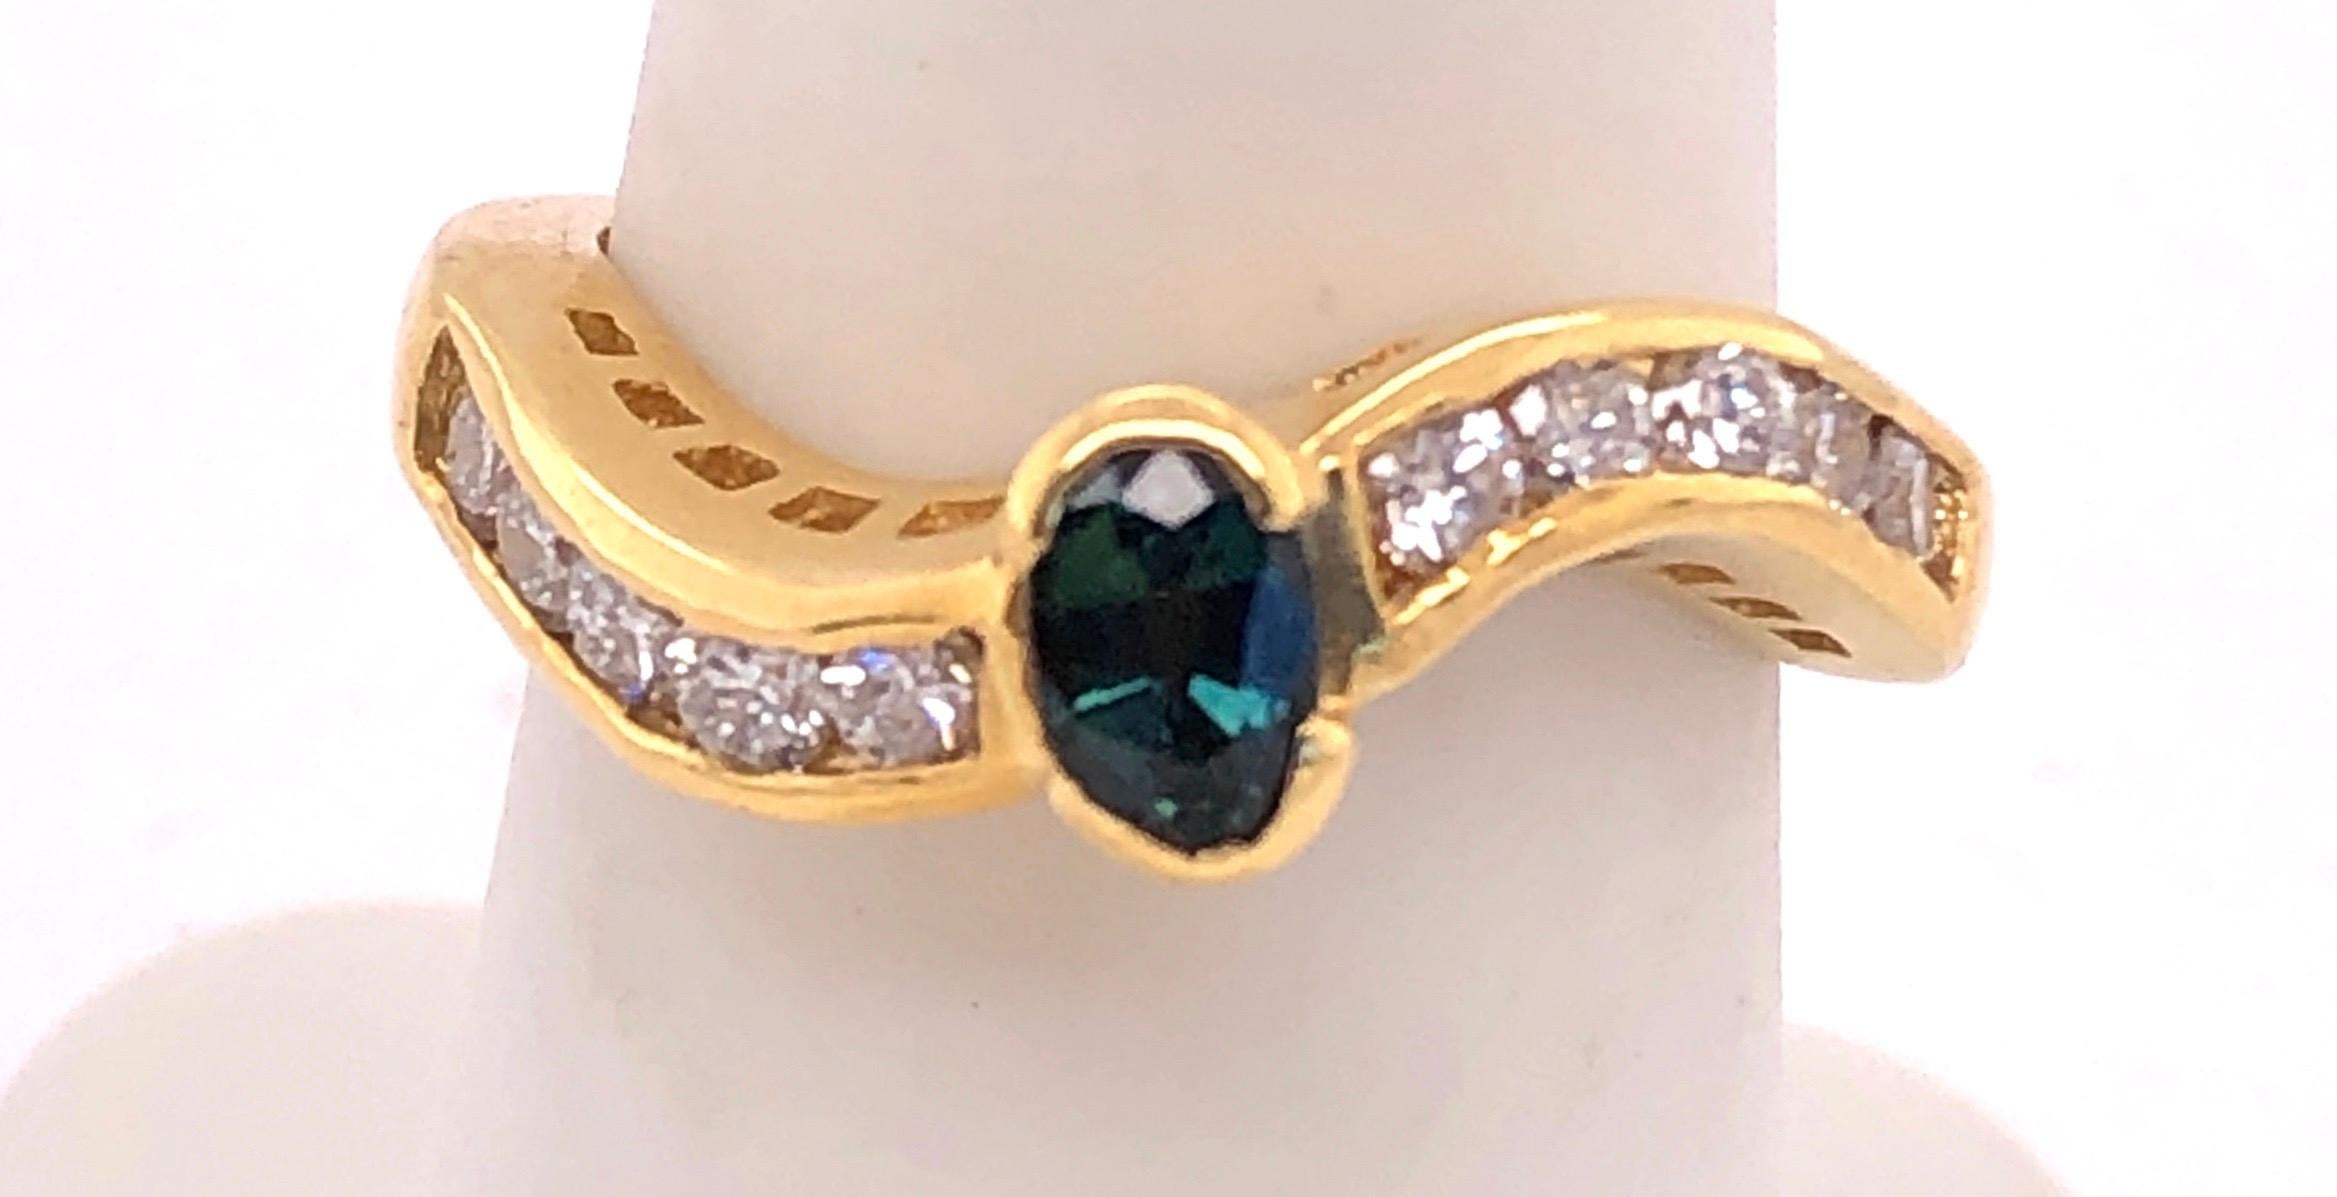 18 Karat Yellow Gold Ring With Sapphire Center And Diamond Accents 
0.80 Total Diamond Weight
Size 6.75 
5.65 grams total weight